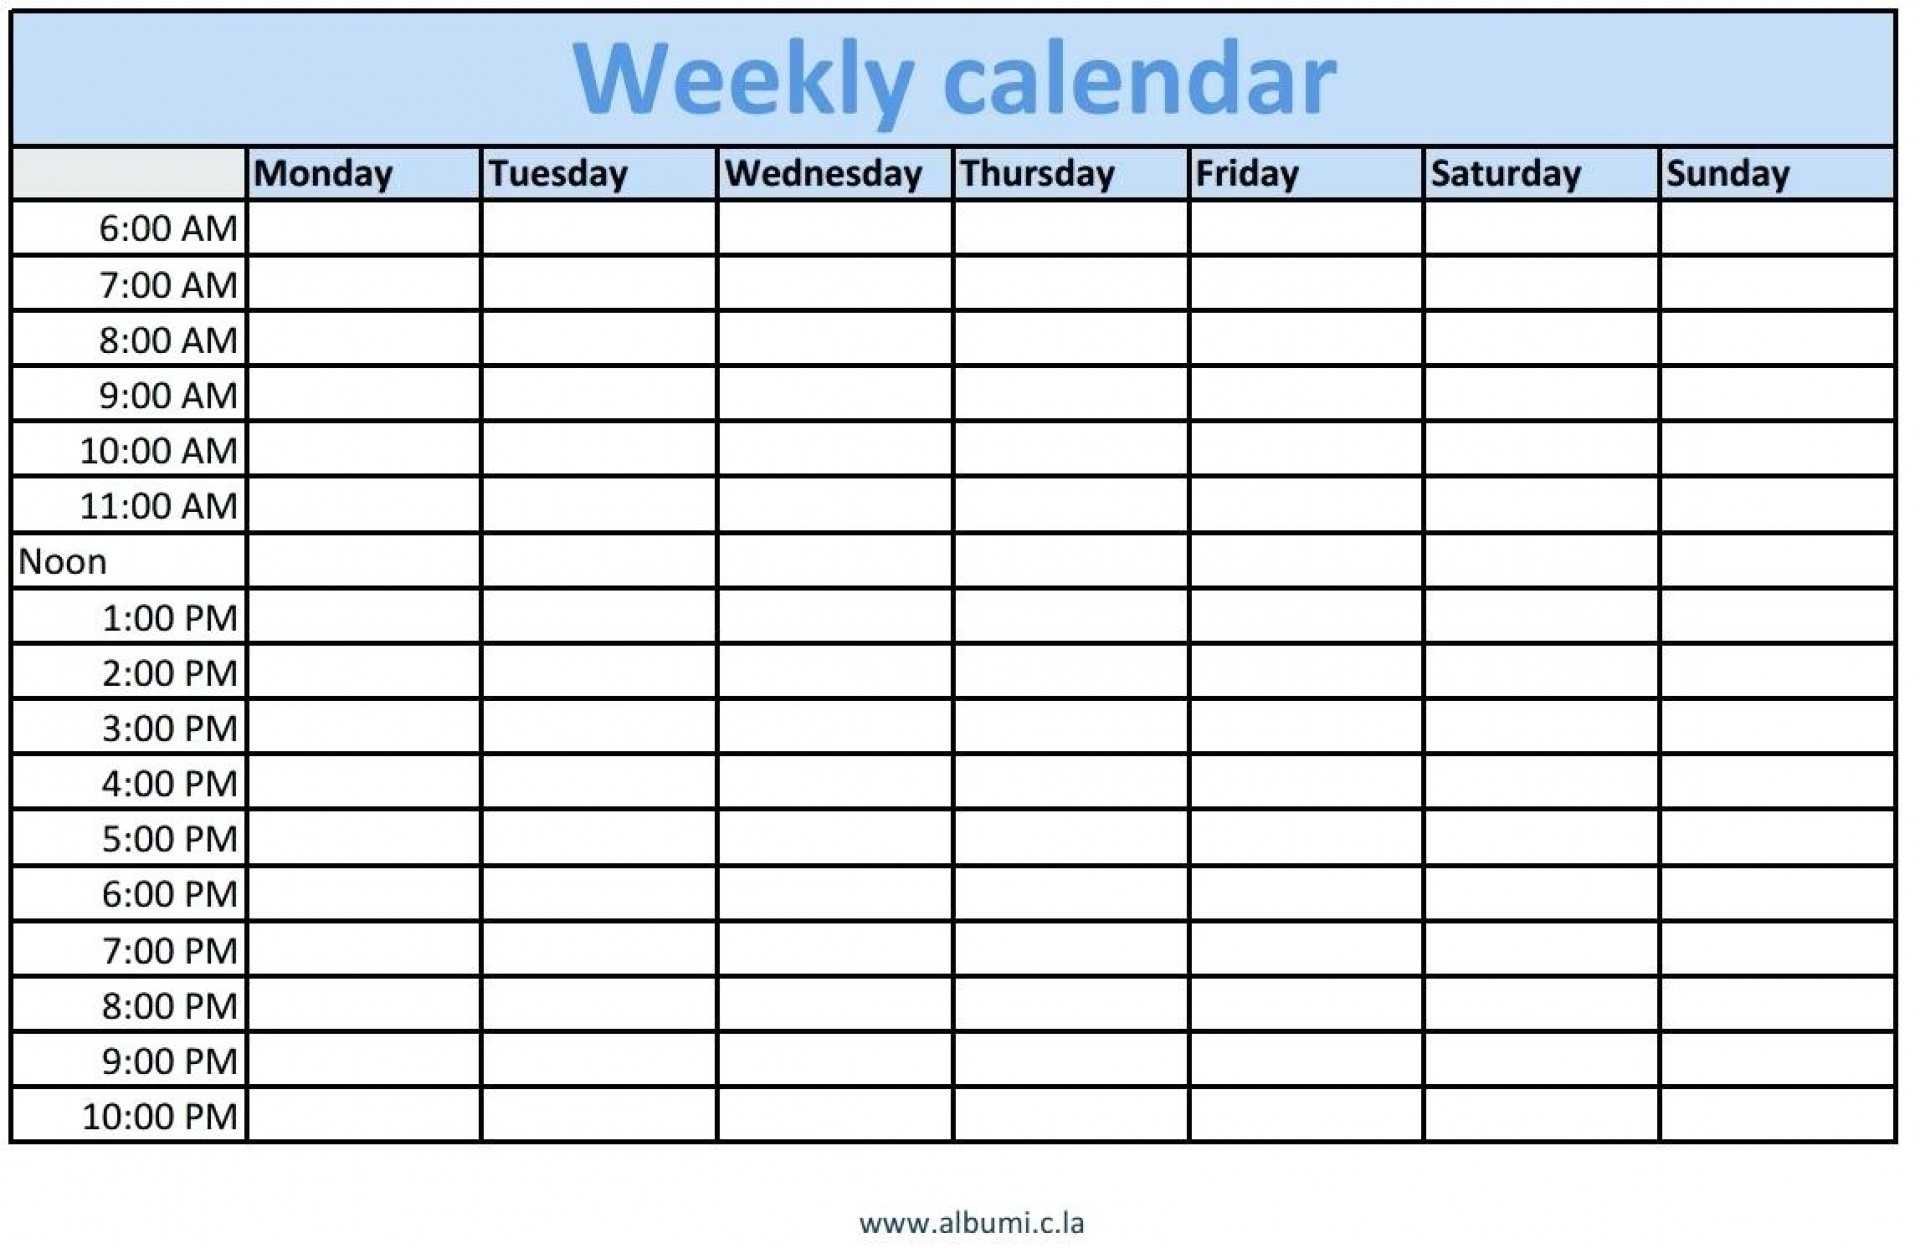 Blank Daily Schedule With Time Slots | Calendar Printing Example with Daily Schedule With Time Slots